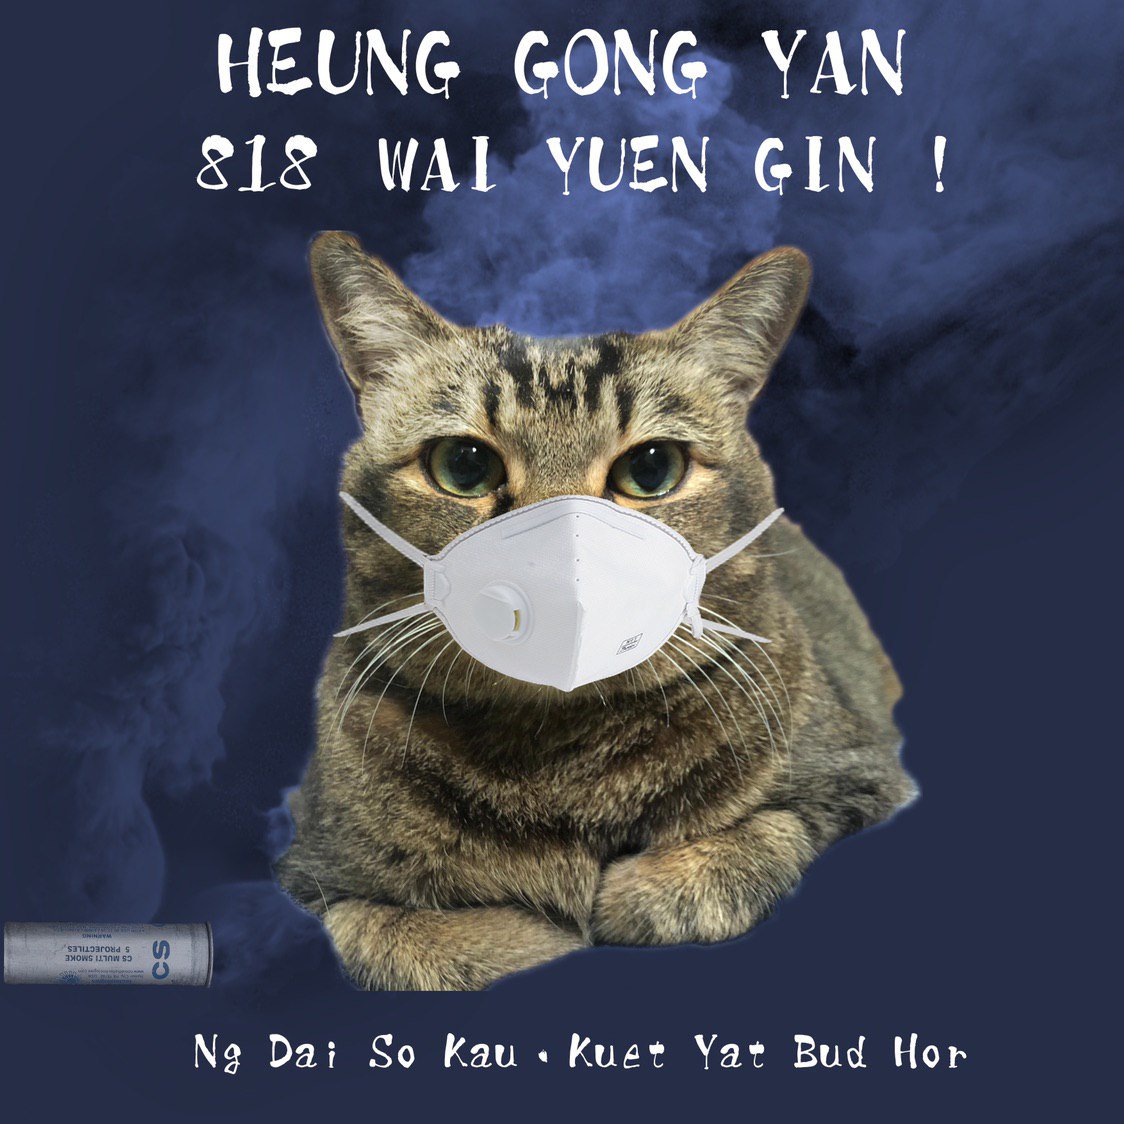 A photoshopped image of a tabby cat wearing a dust mask, on a navy blue background. There is a little CS gas canister on the left emitting a cloud of smoke. The caption in transliterated Cantonese reads: "Hong Kongers, see you at Victoria Garden on Aug 18! Five Demands, Not One Less!"